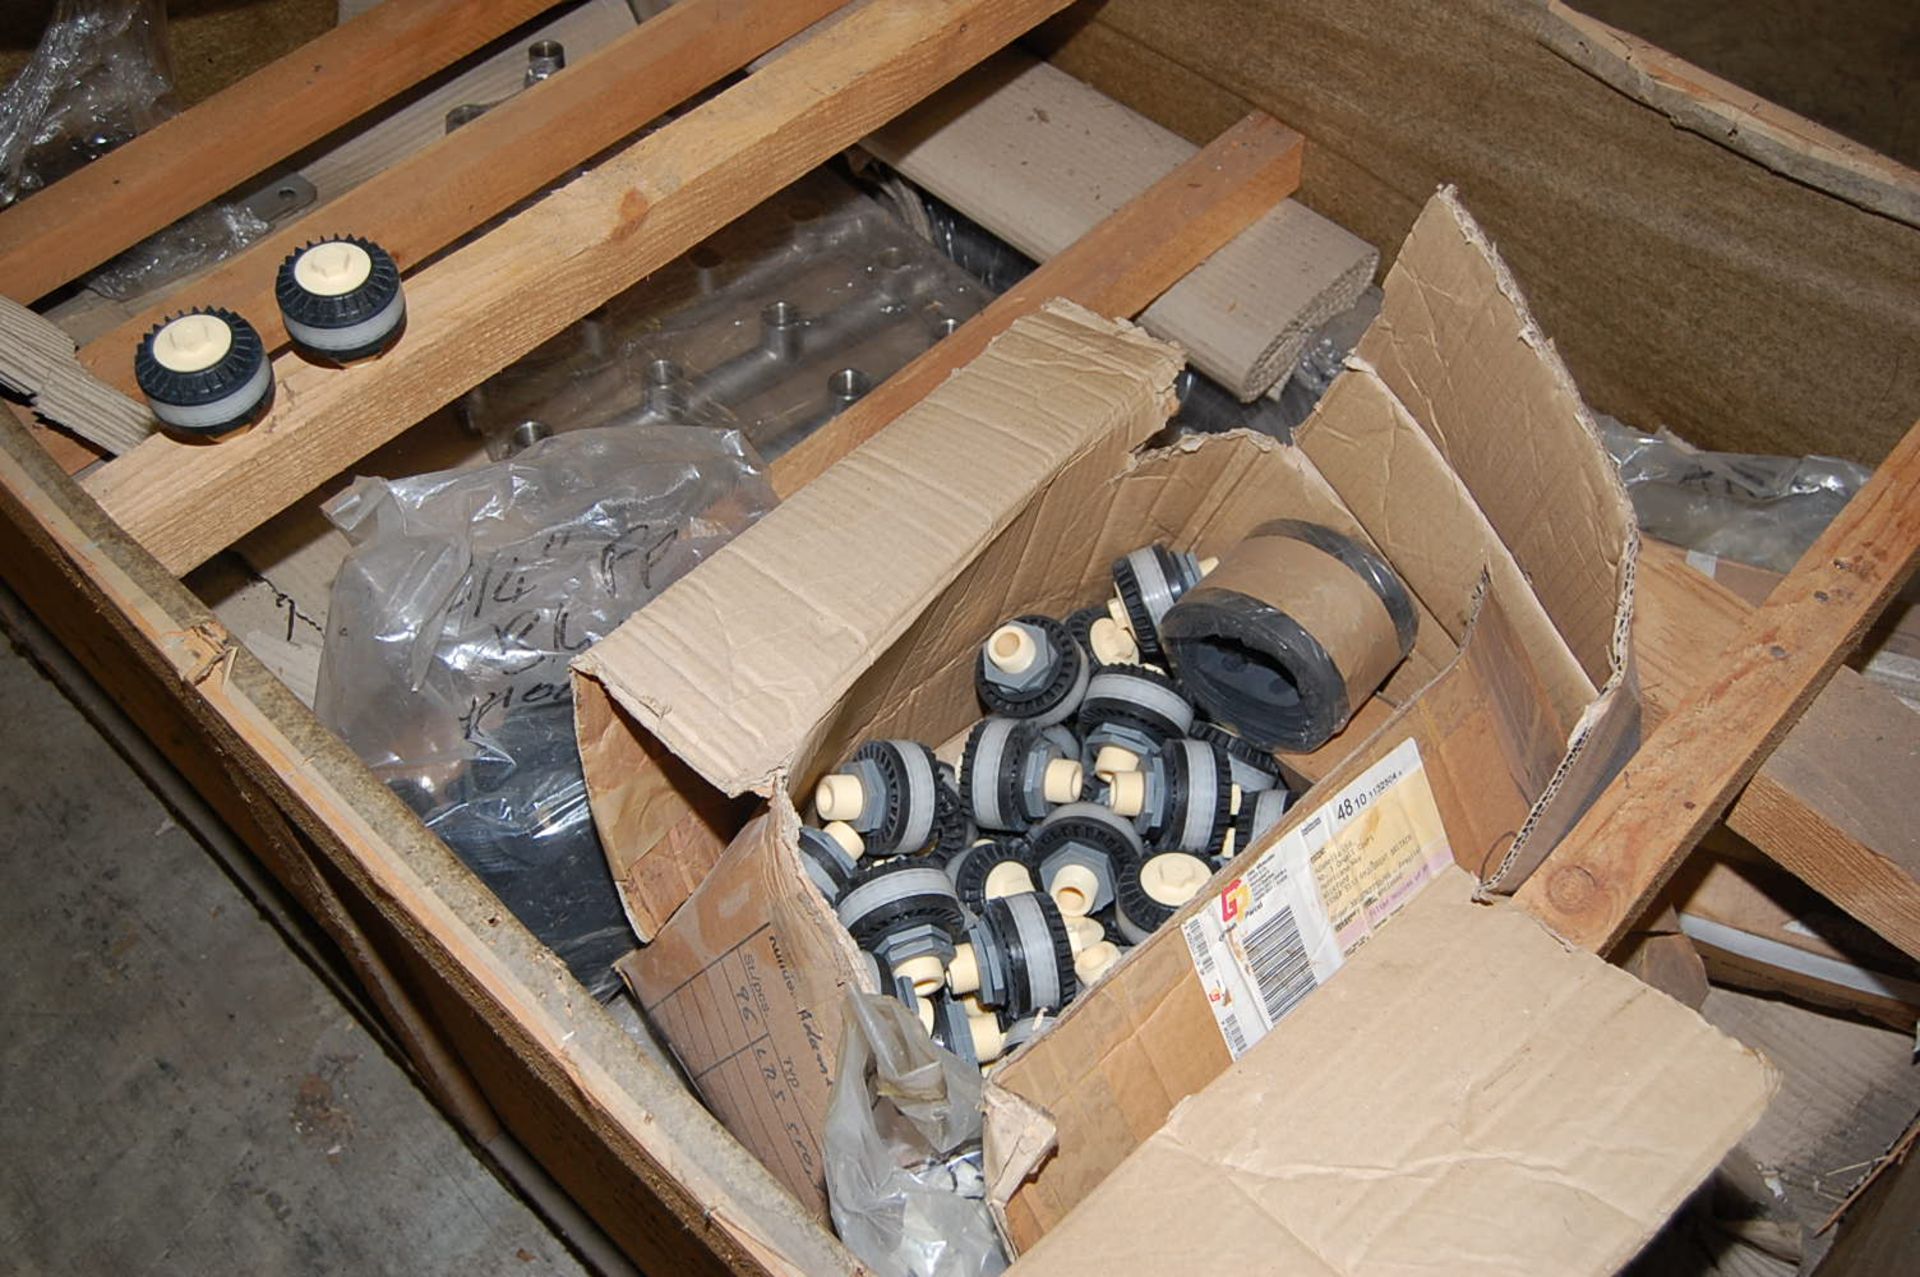 Crate - SS Parts & Components, Assorted Plugs, Washers, Stainless Steel Clamps - Rigging Fee $50, I - Image 2 of 3